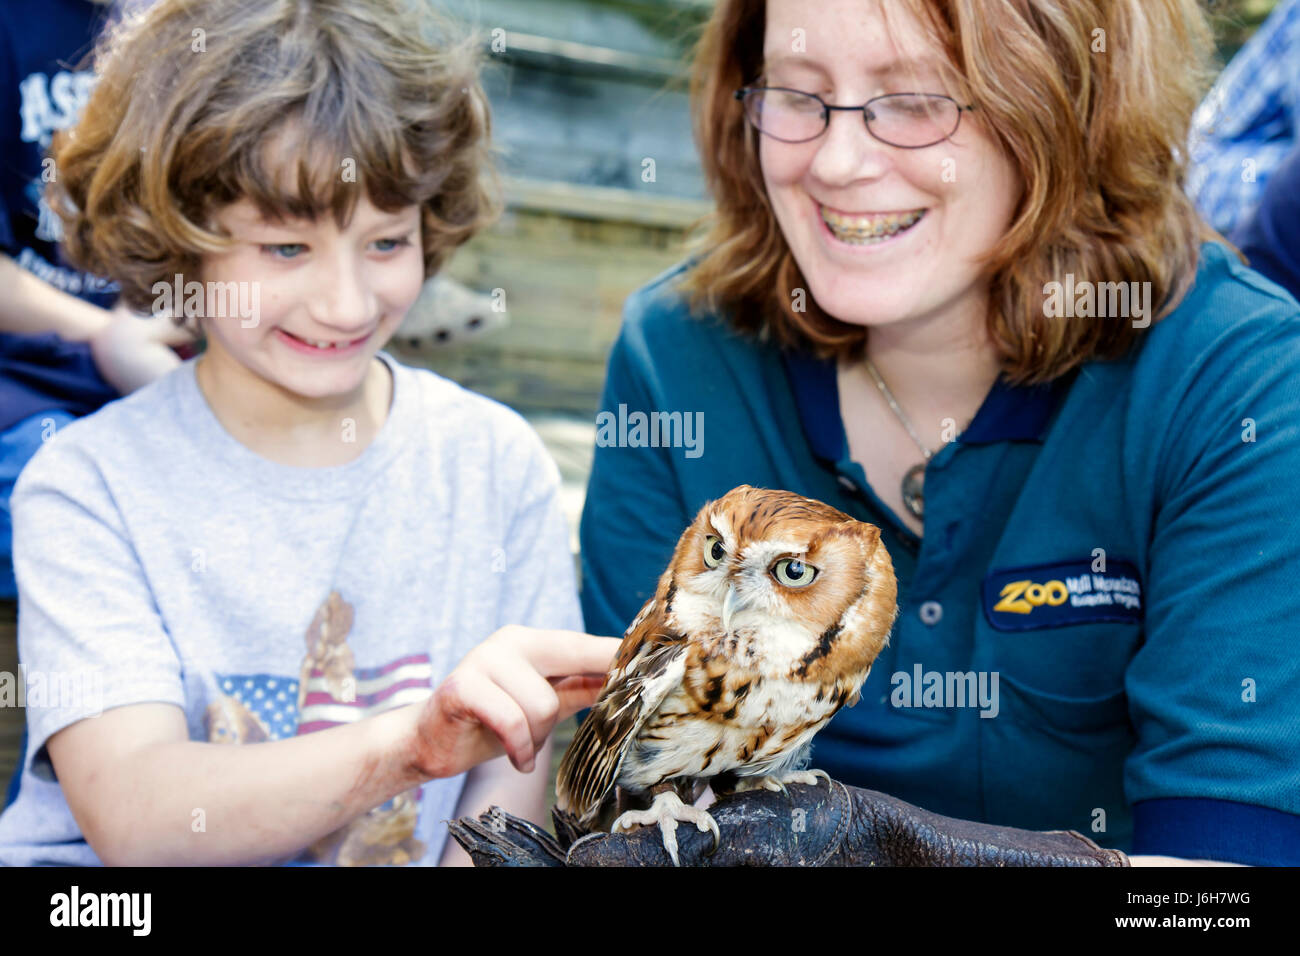 Roanoke Virginia,Mill Mountain Zoo,screech owl,bird birds,animal,trainer,girl girls,youngster youngsters youth youths female kid kids child children,s Stock Photo